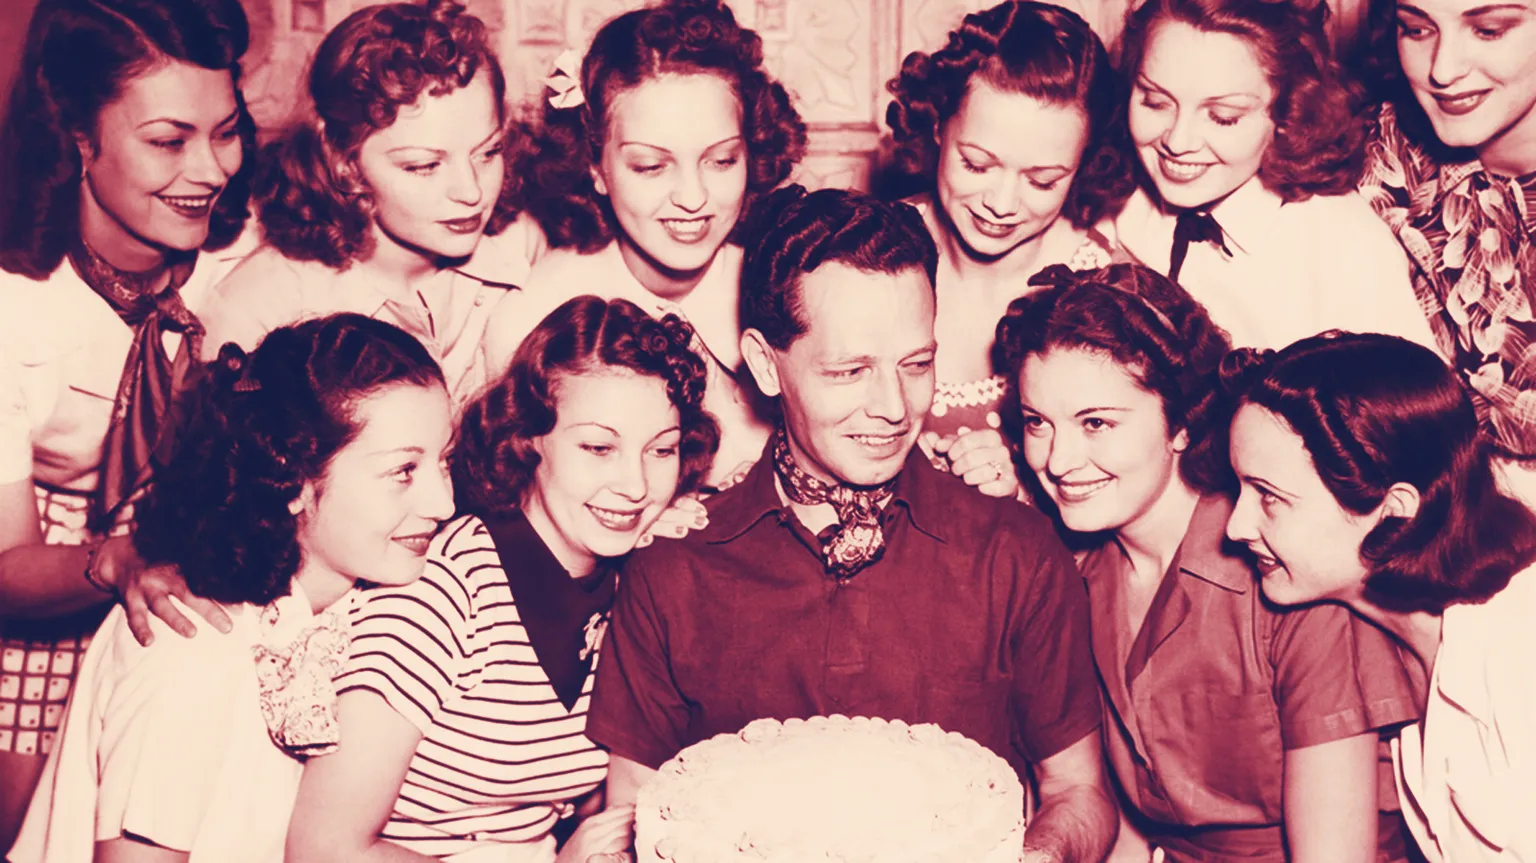 Satoshi with the Bitcoin Belles. PHOTO CREDIT: Shutterstock
